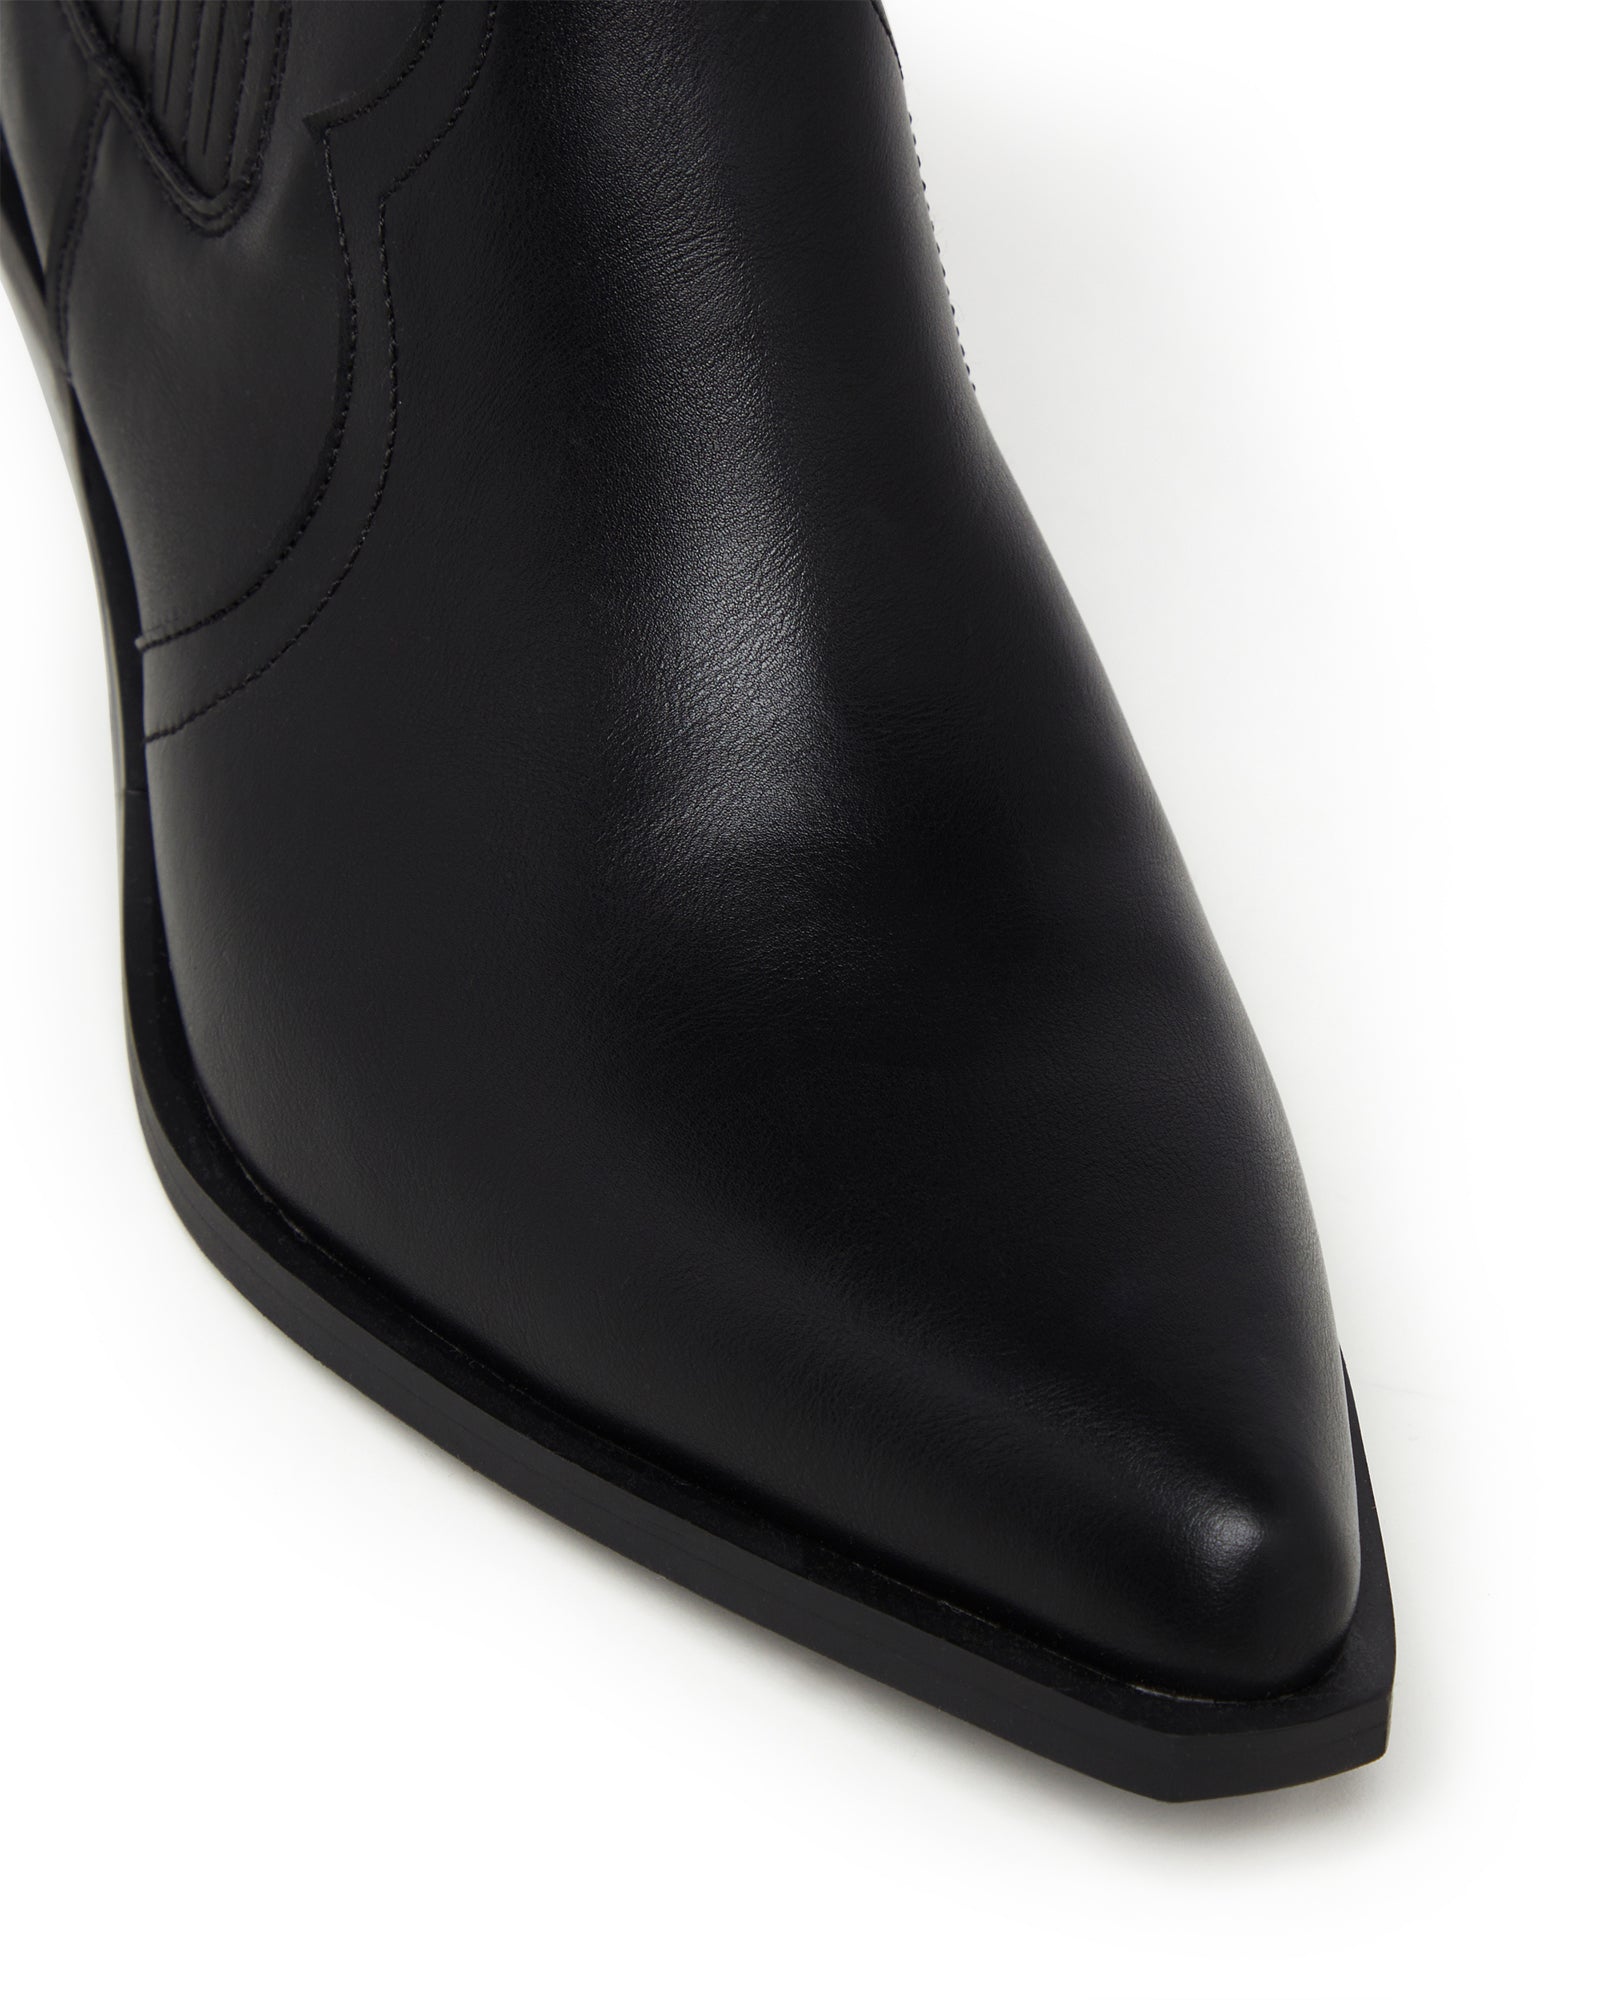 Therapy Shoes Forum Black | Women's Boots | Western | Ankle | Cowboy